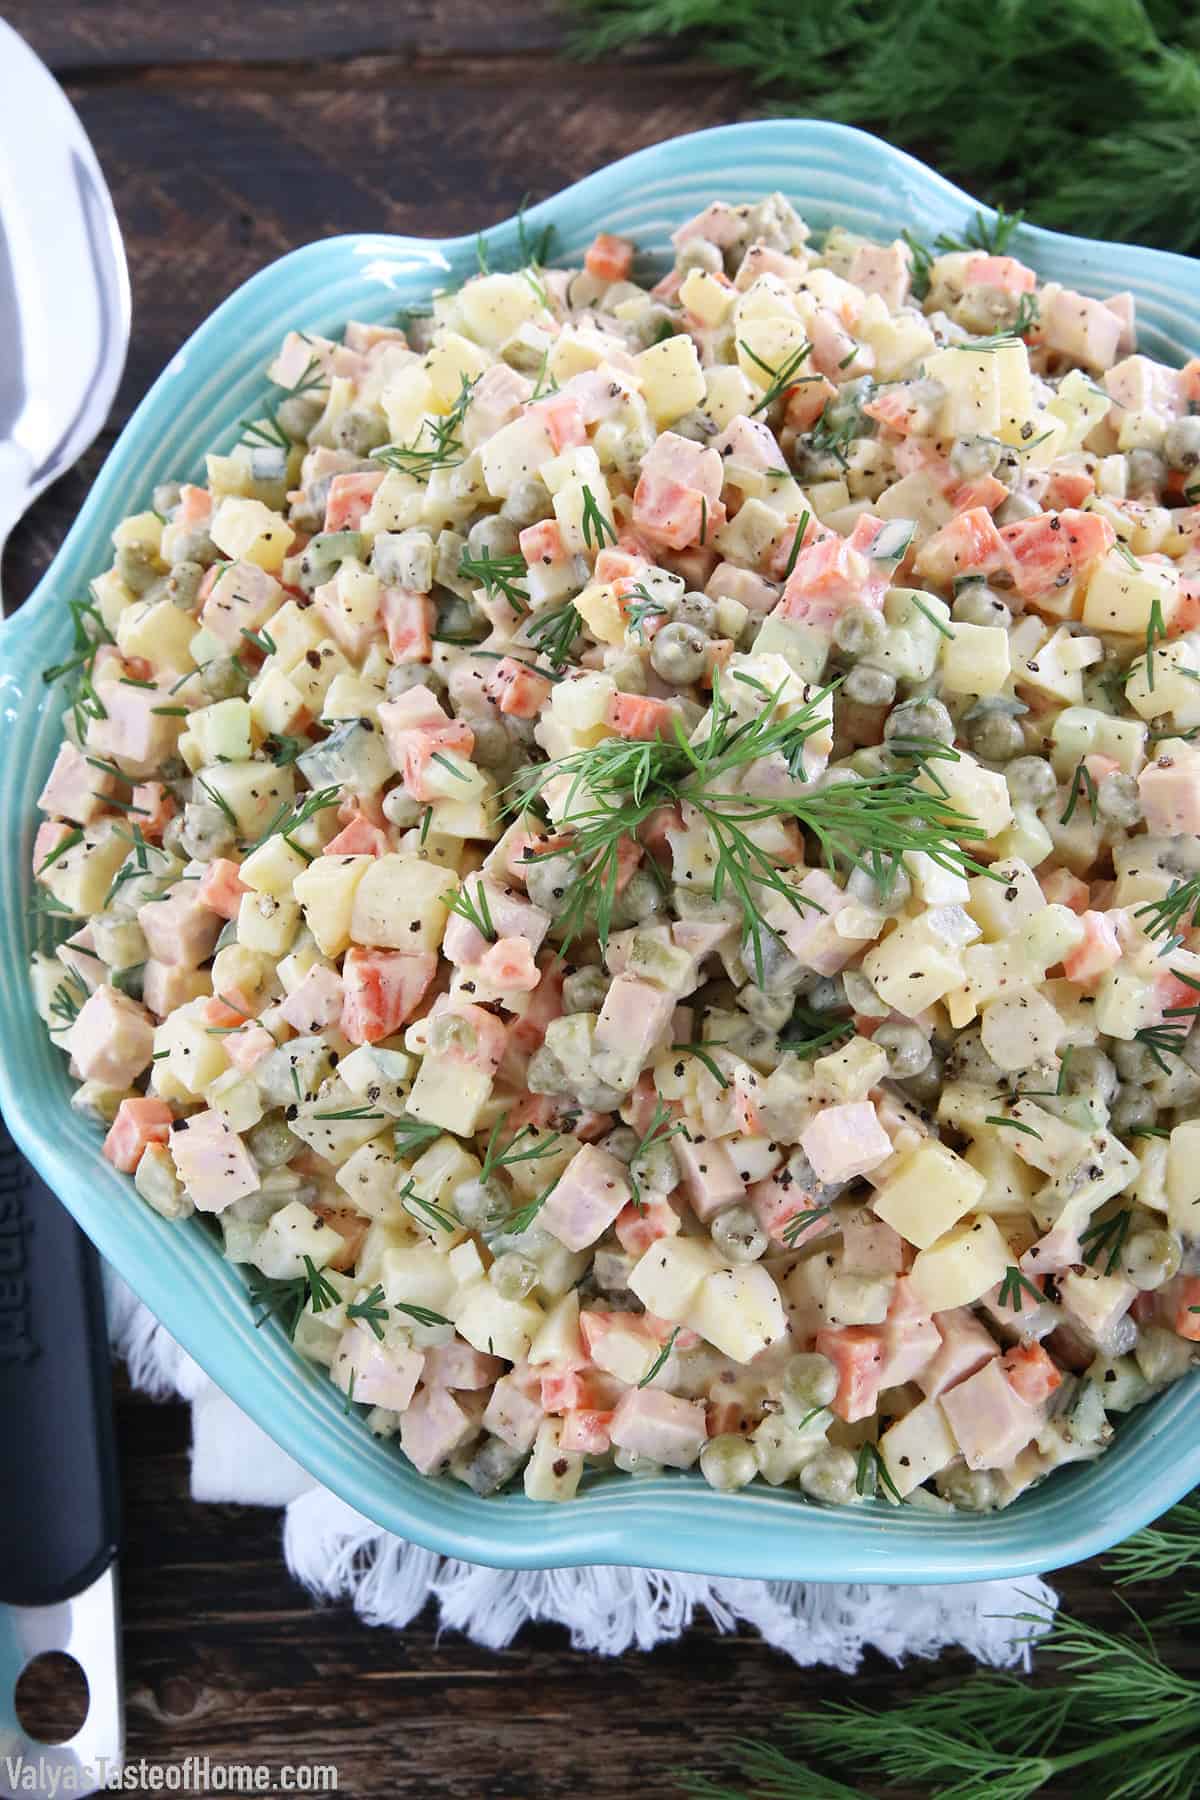 t’s a very popular Ukrainian salad diced from varieties of vegetables and meats. As a child, I was looking forward to some kind of special event or a holiday to get to enjoy this salad.